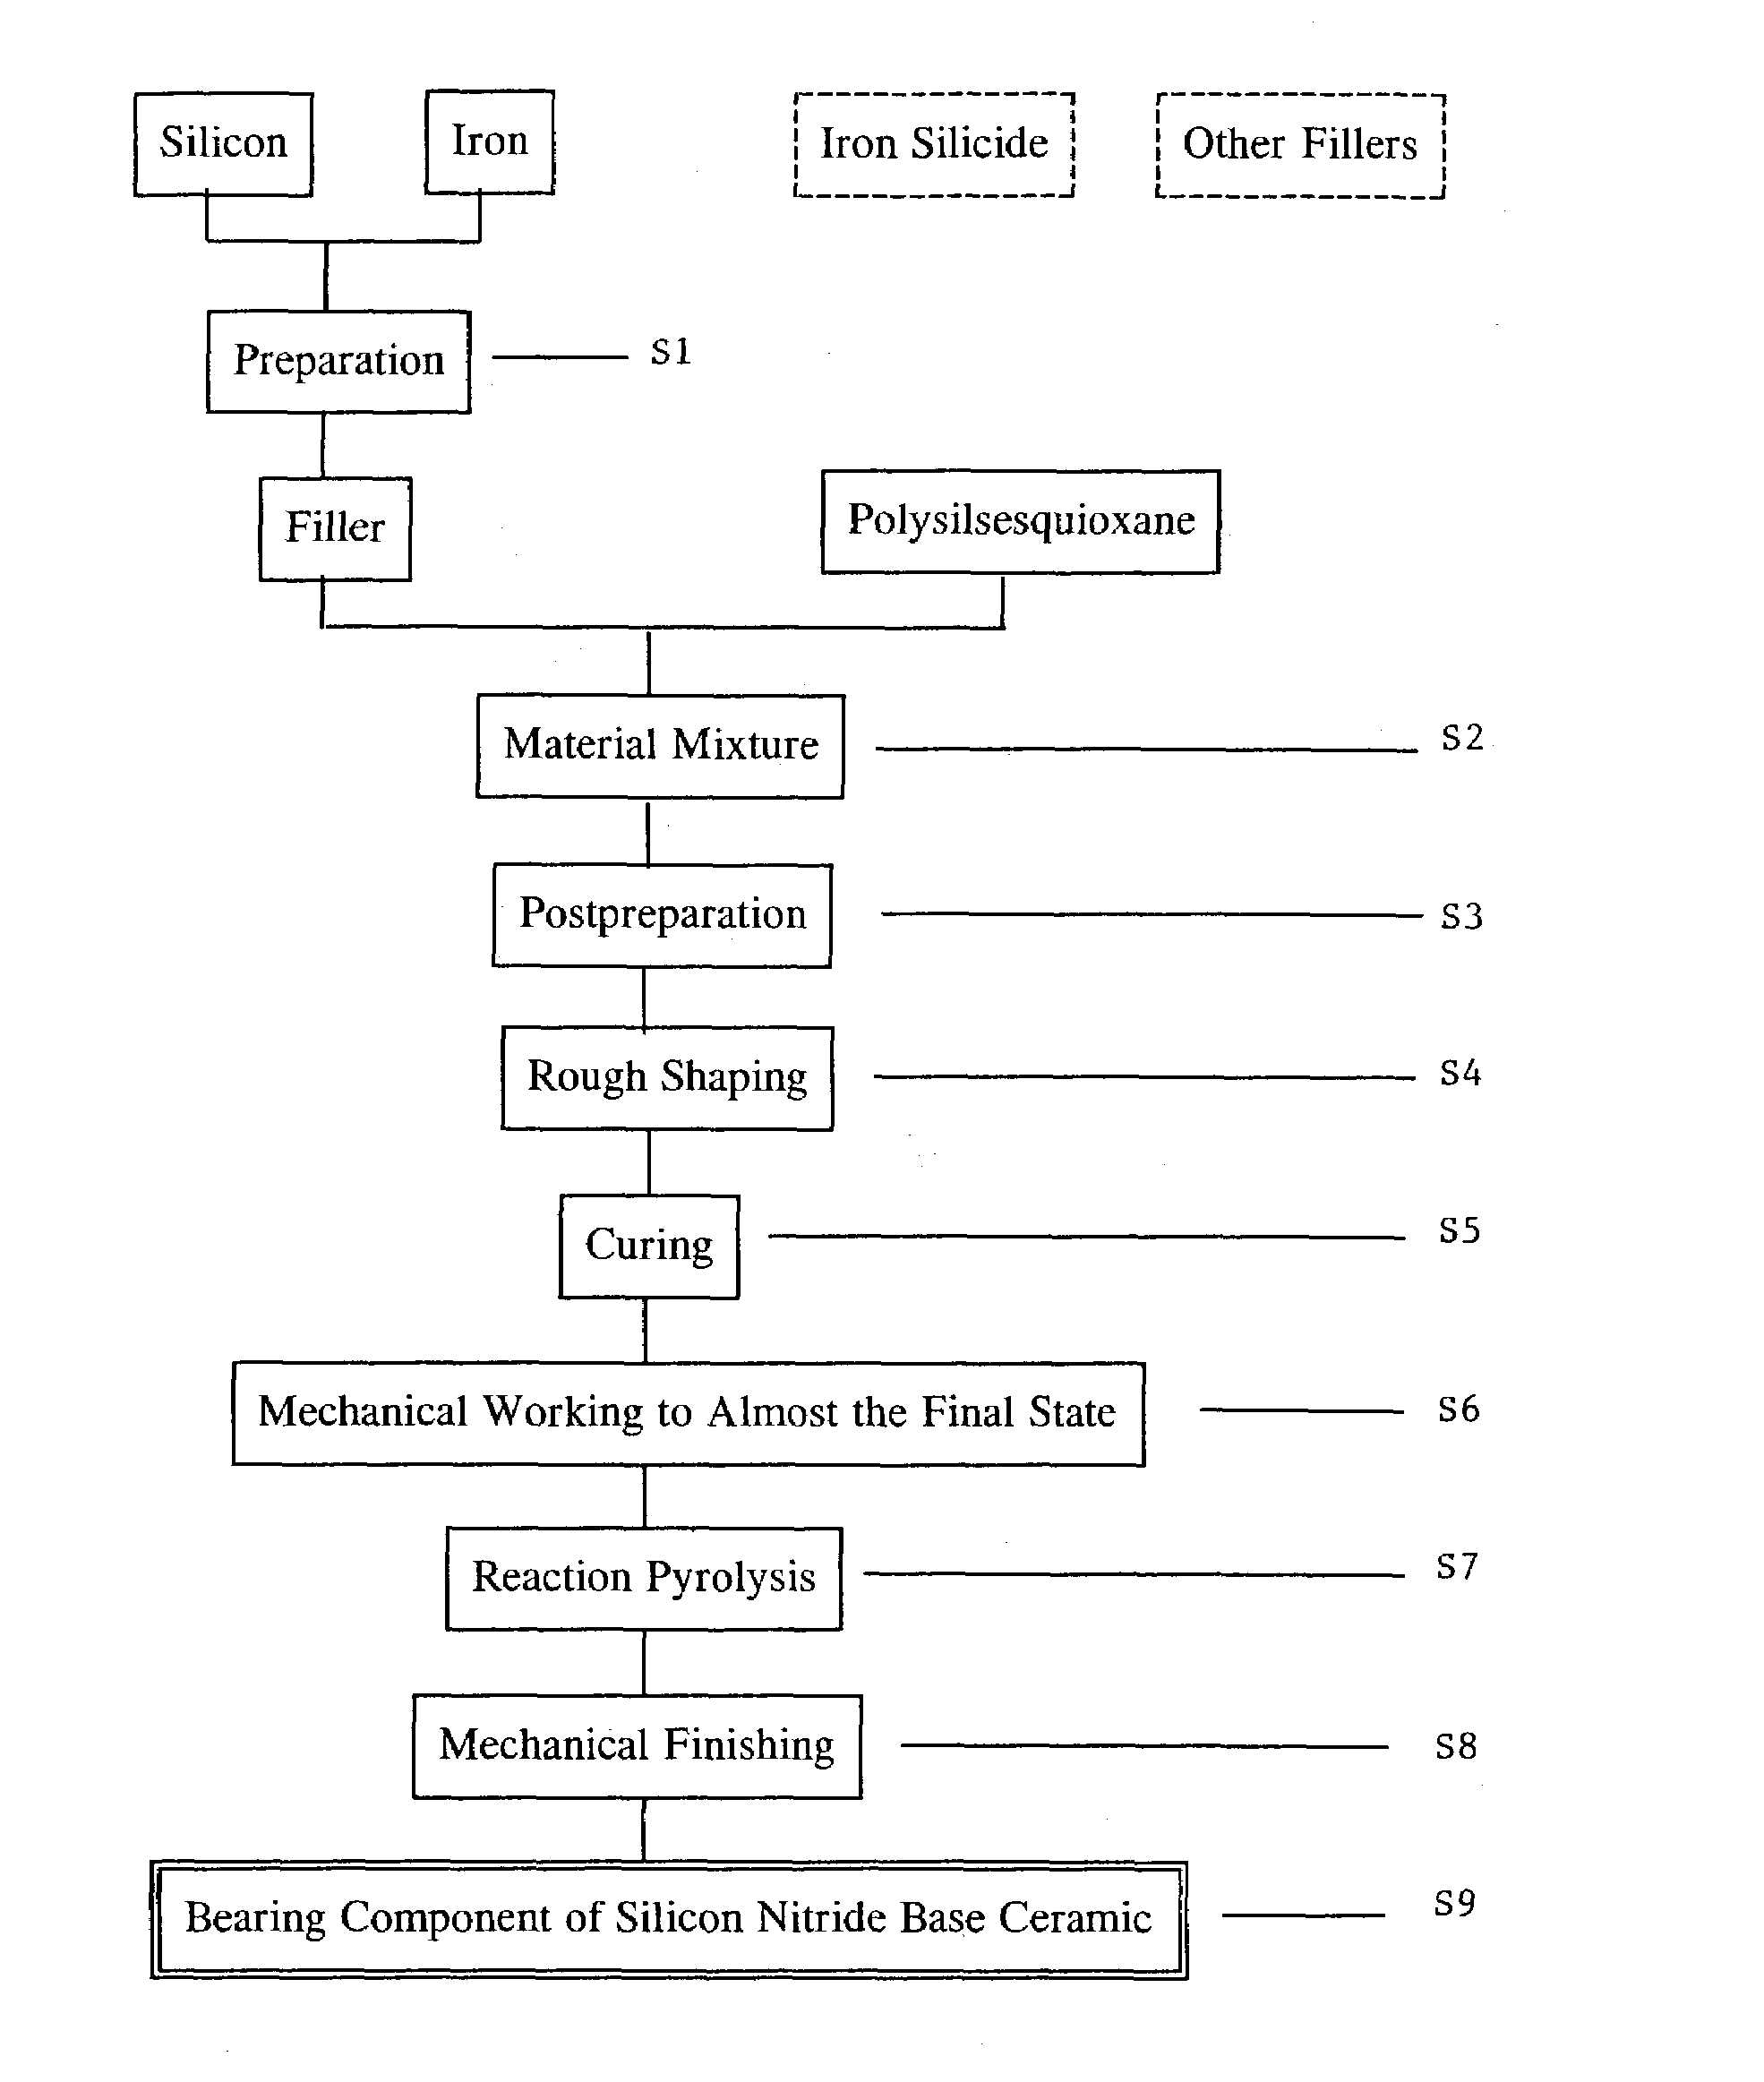 Process for producing ceramic bearing components